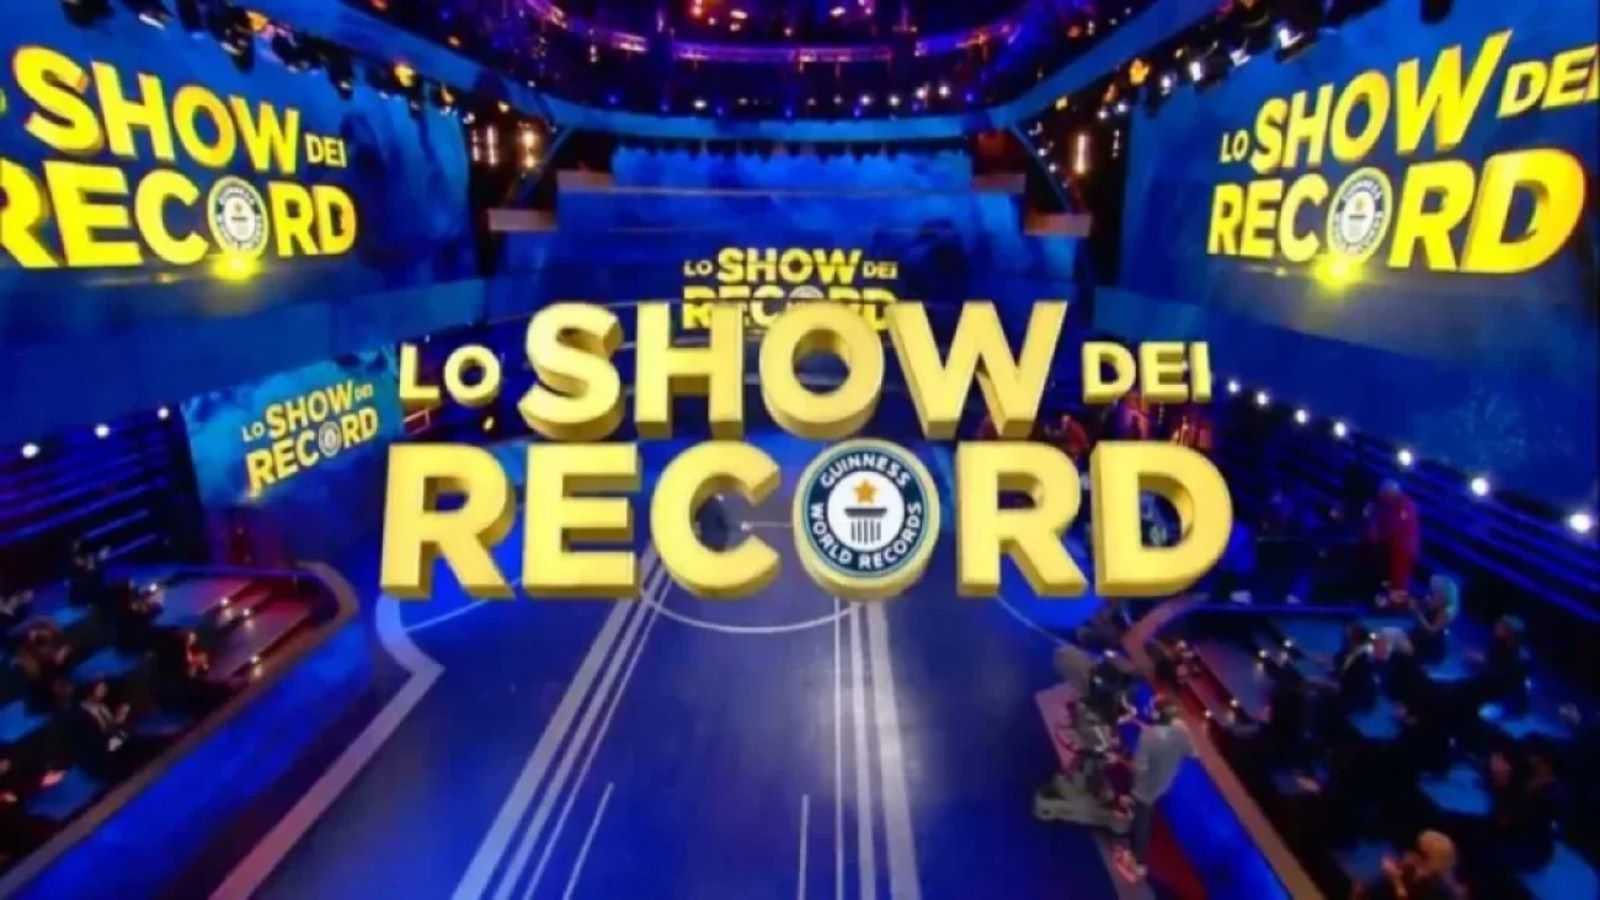 The best of Lo Show dei Record, on Canale 5 with Gerry Scotti: the previews of the April 30 episode